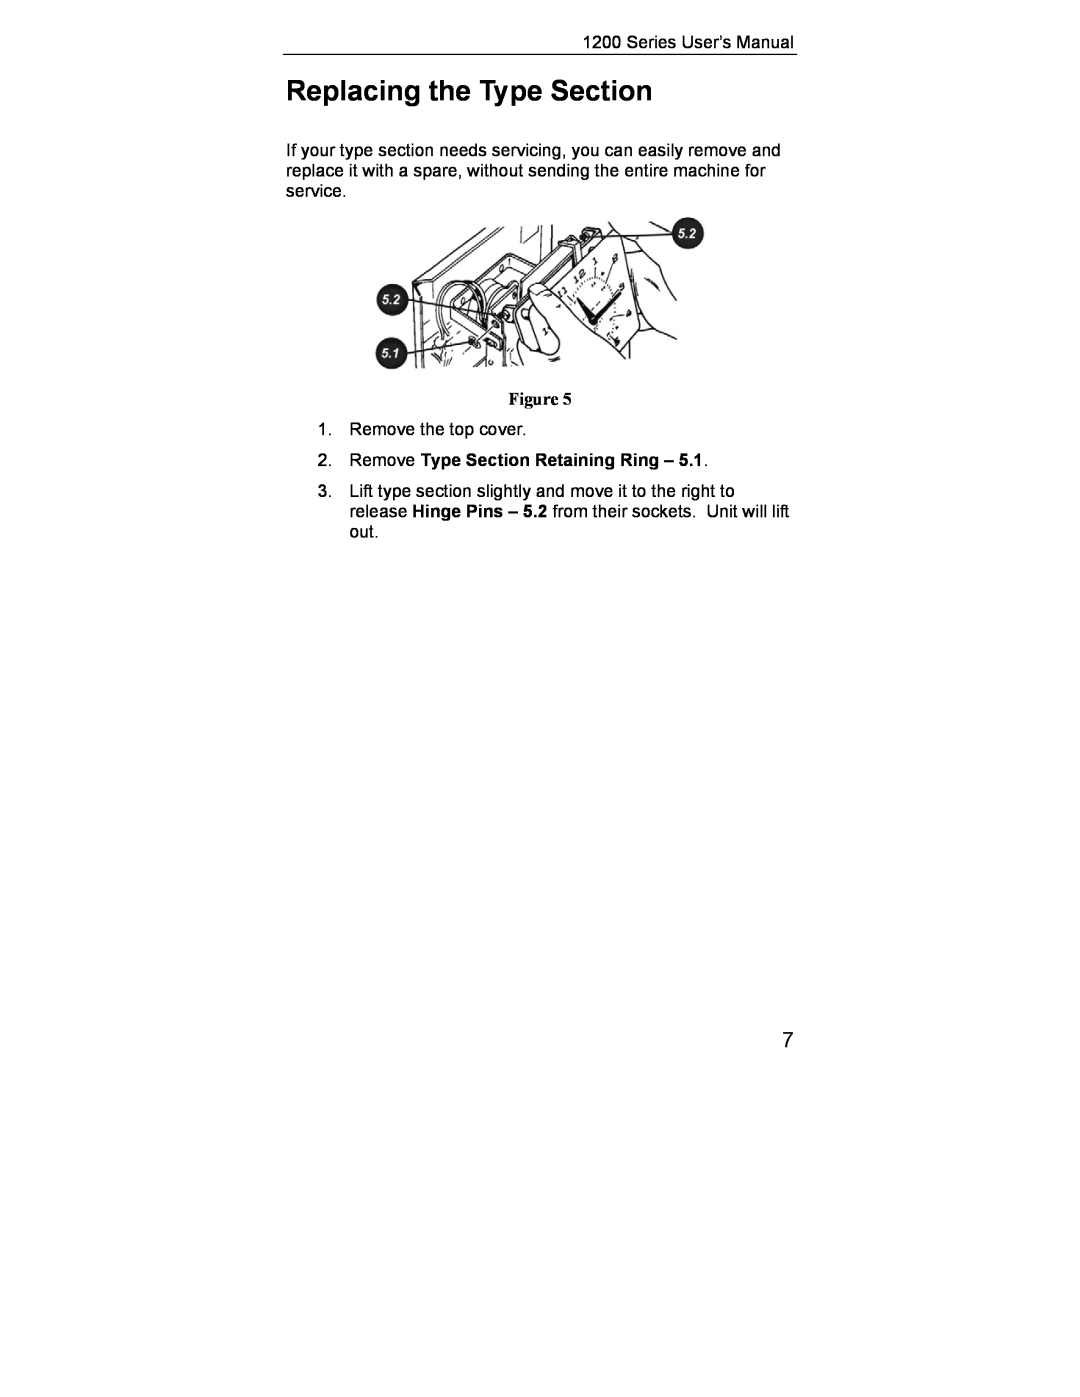 Lathem 1200 Series user manual Replacing the Type Section, Remove Type Section Retaining Ring 